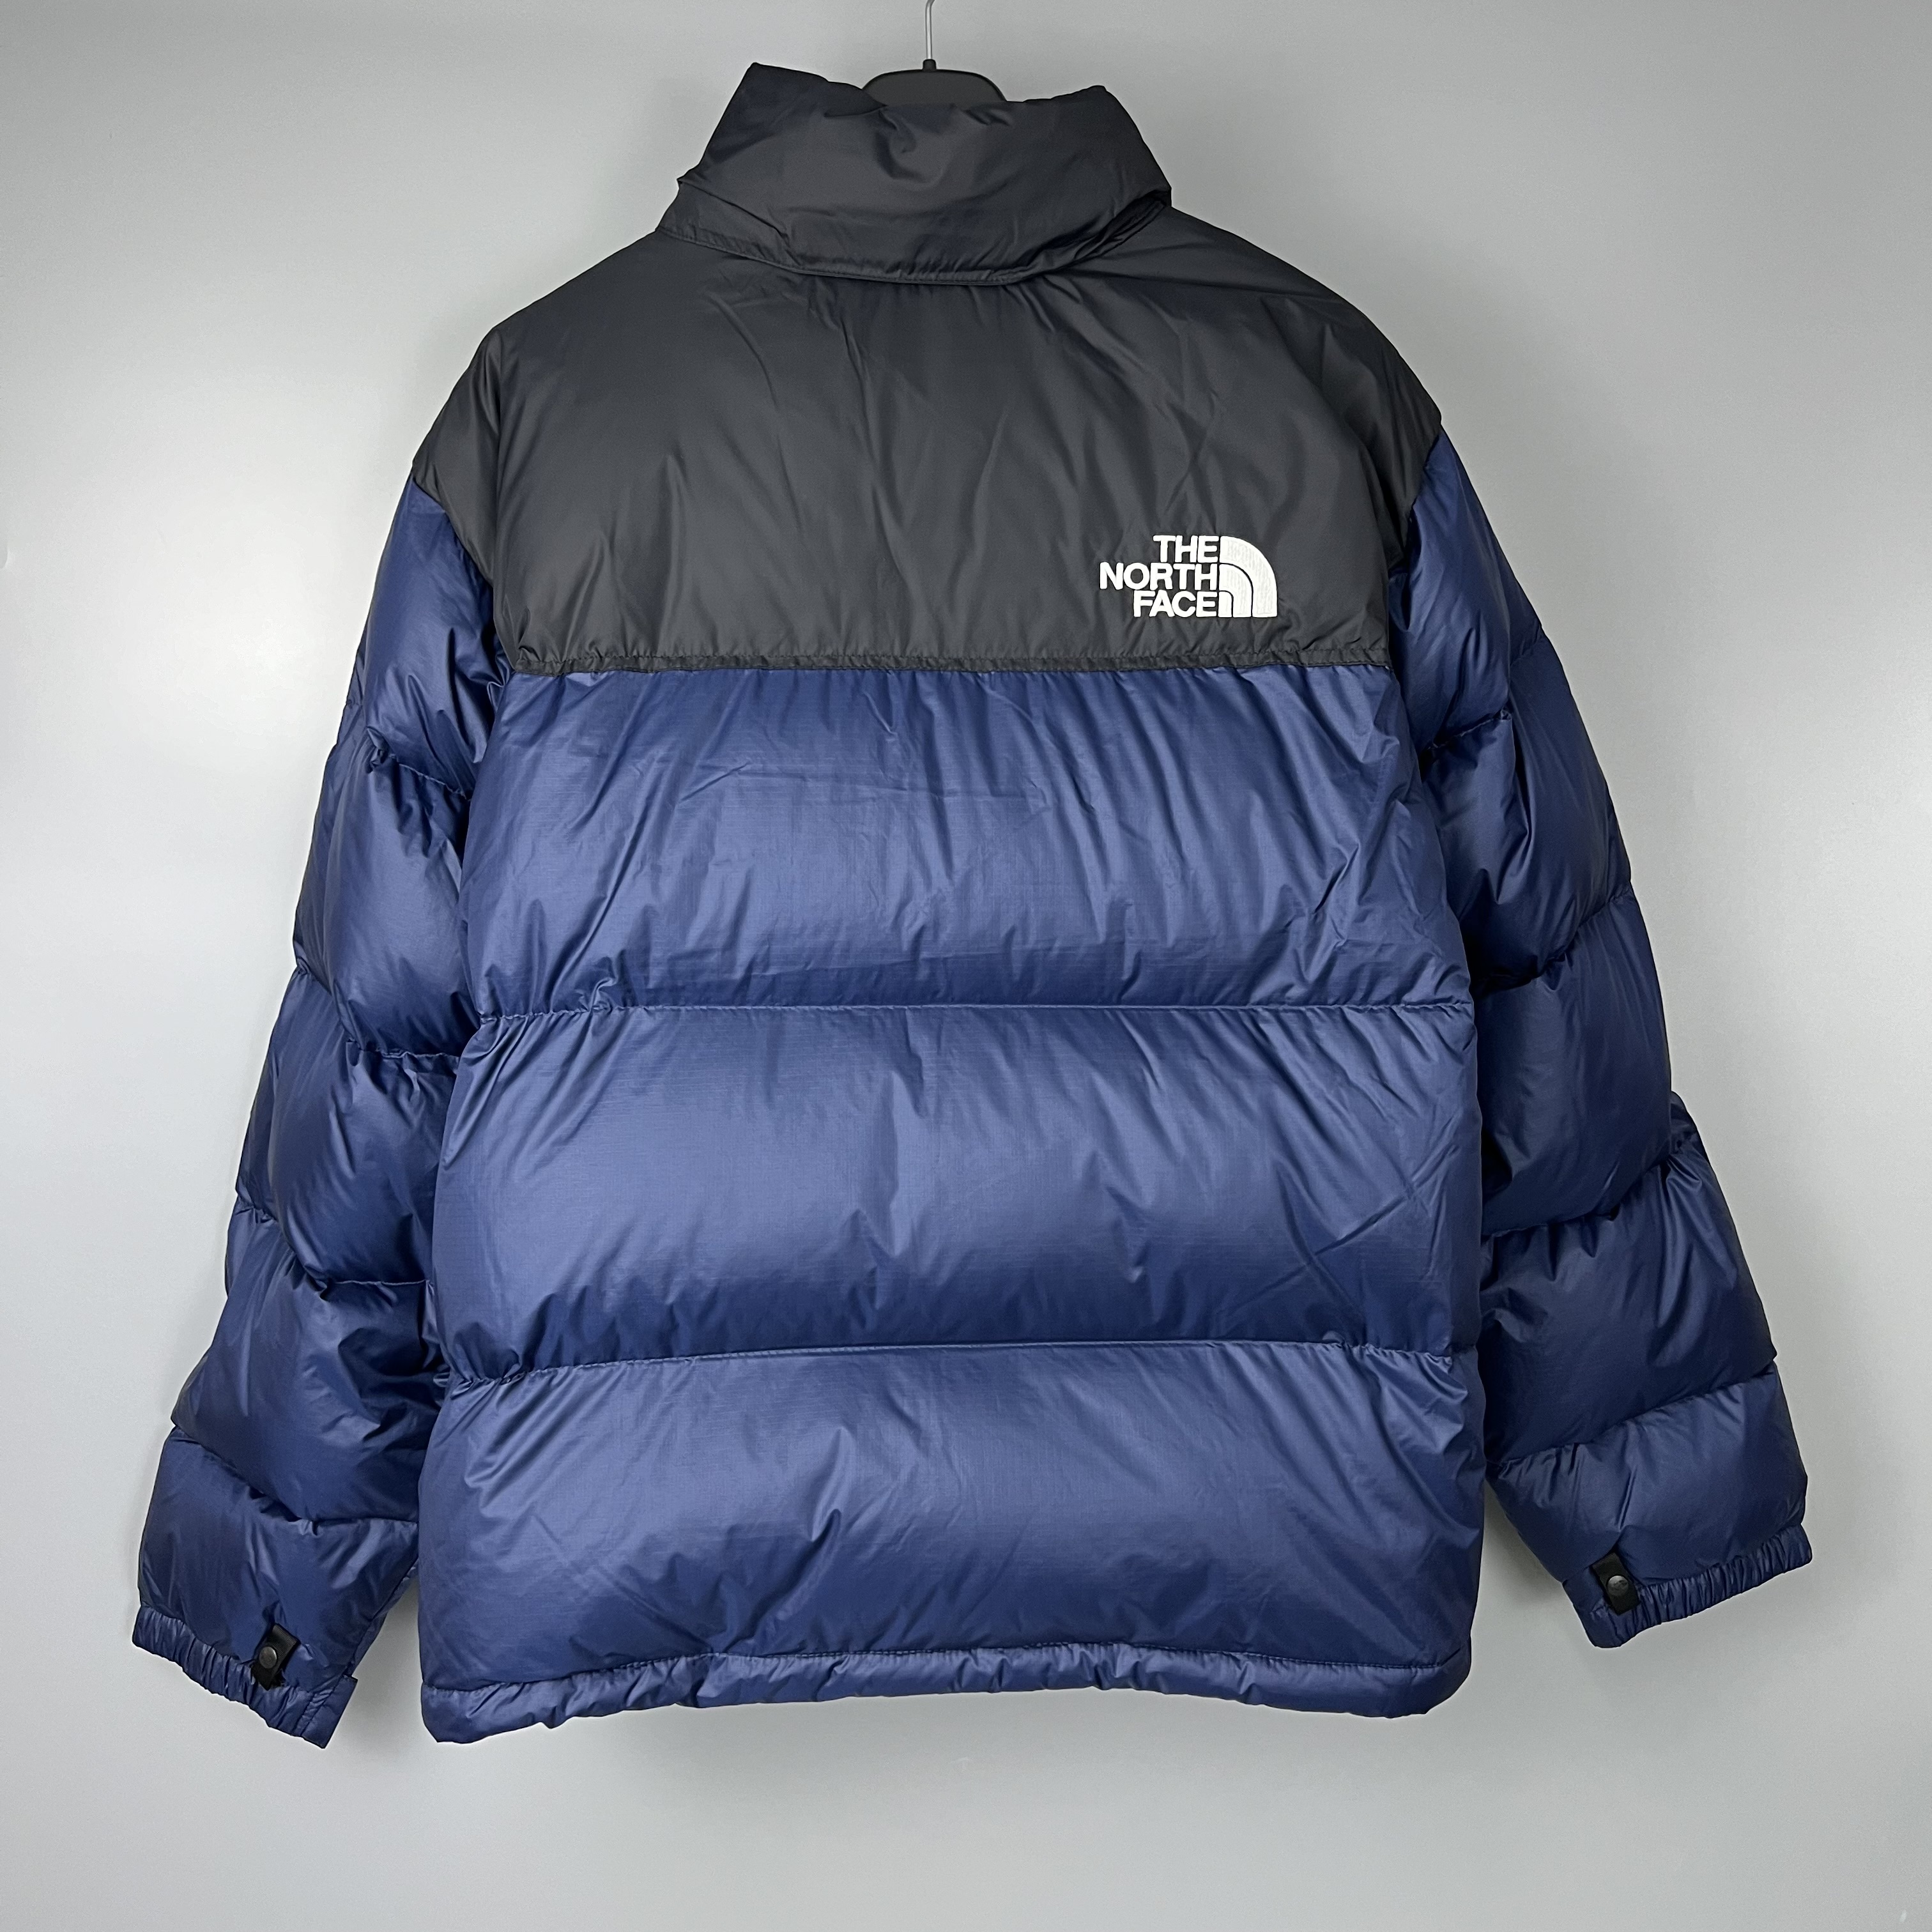 THE NORTH FACE NF0A3C8D92A1 # 